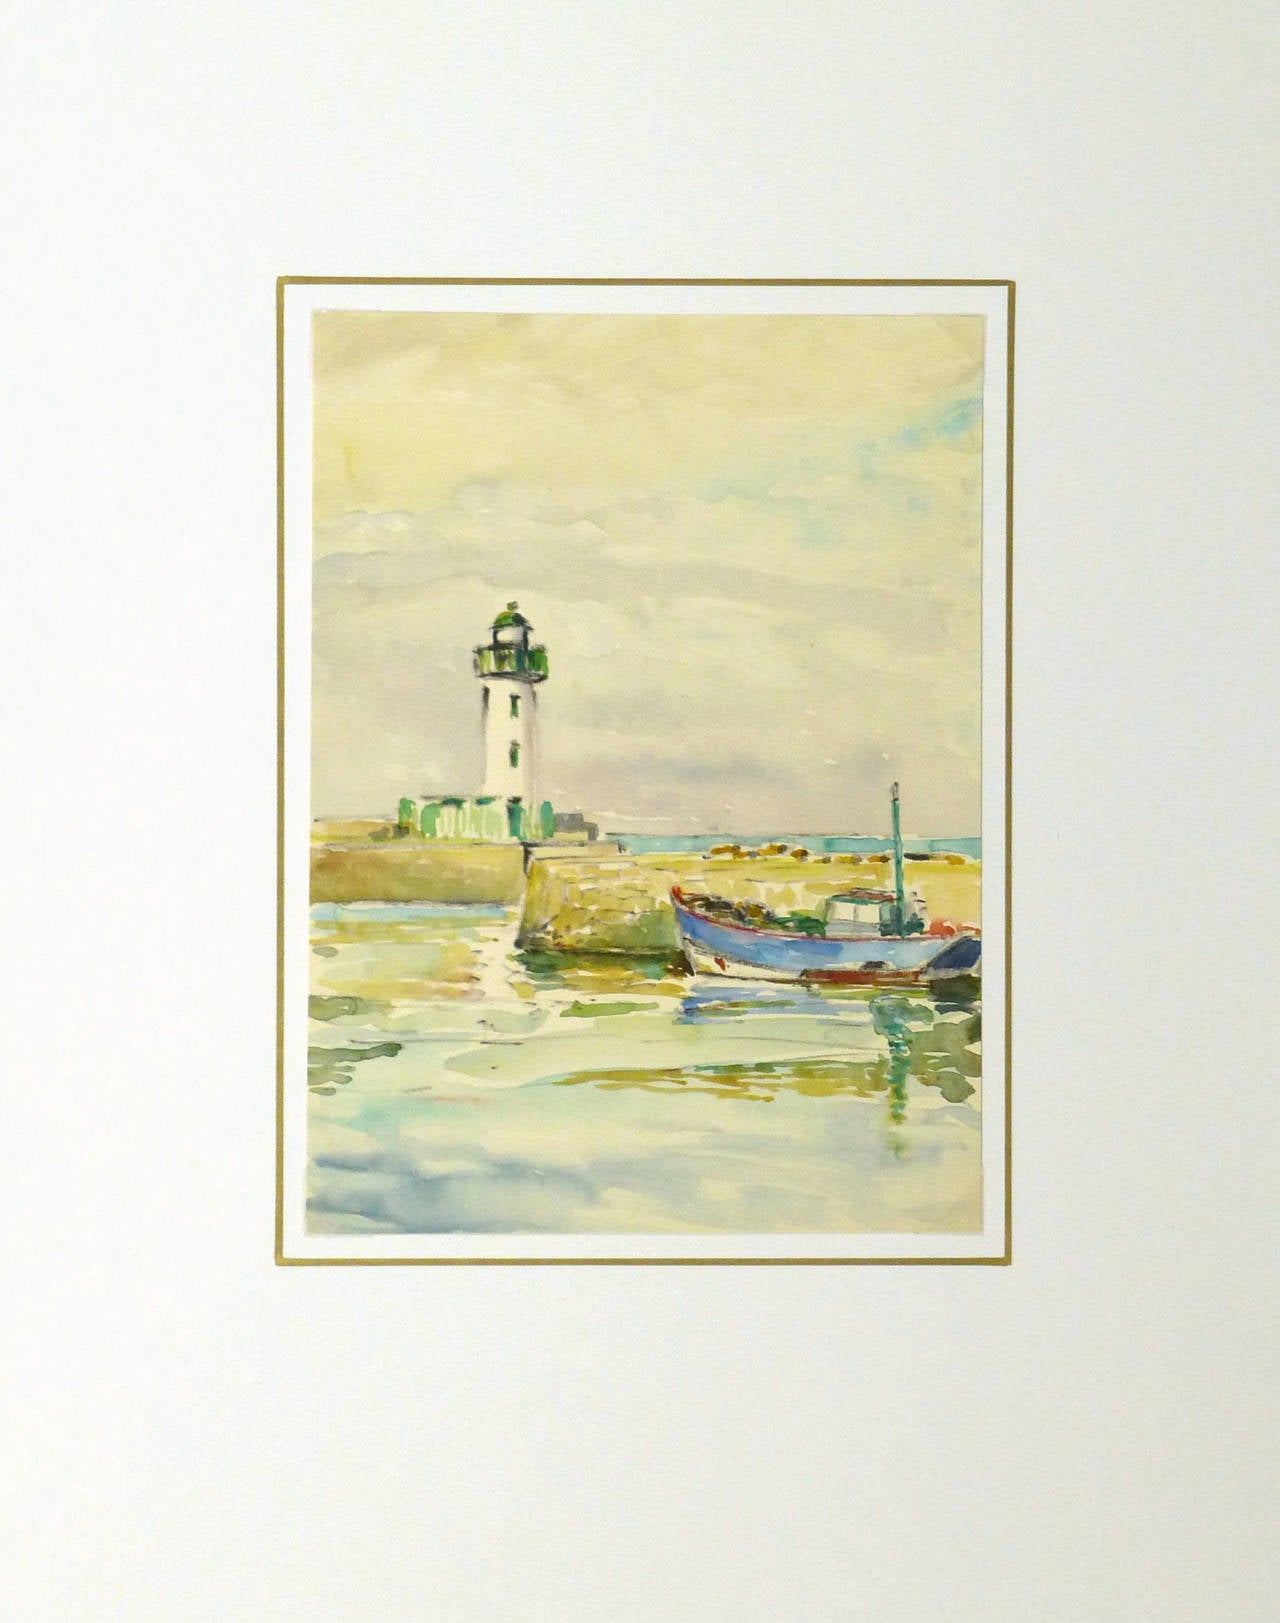 Vintage landscape watercolor painting of Le Tréport lighthouse in Normandy, France by French artist C. Groux, circa 1930. Unsigned. 

Displayed on a white mat with a gold border and fits a standard-size frame. Archival plastic sleeve and